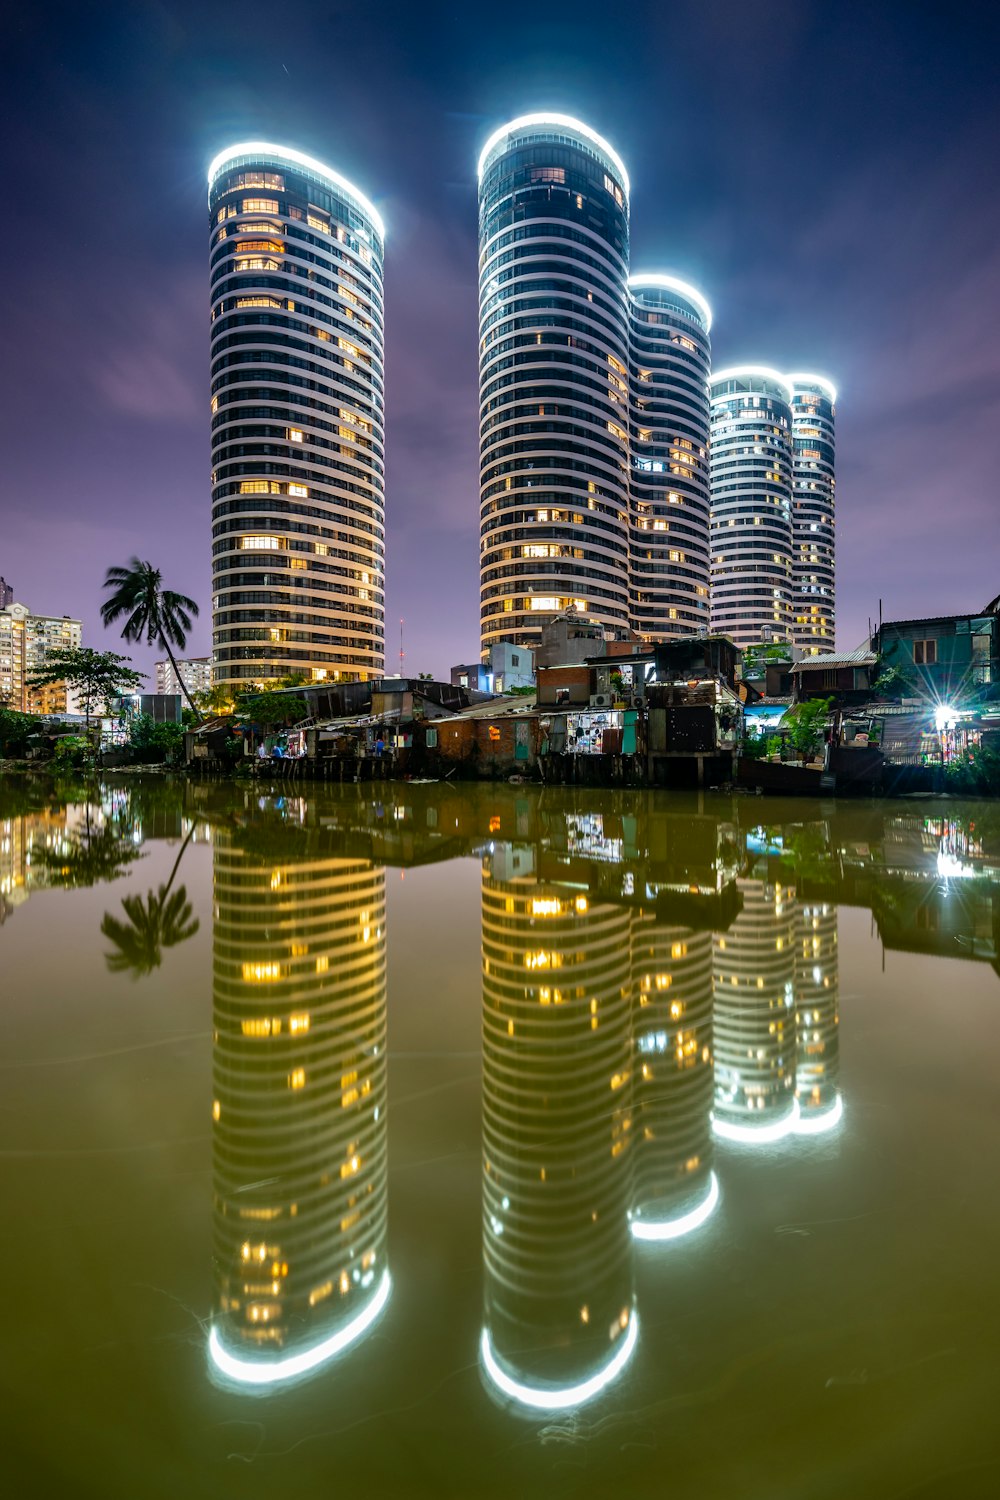 reflection of lighted buildings on water during night time